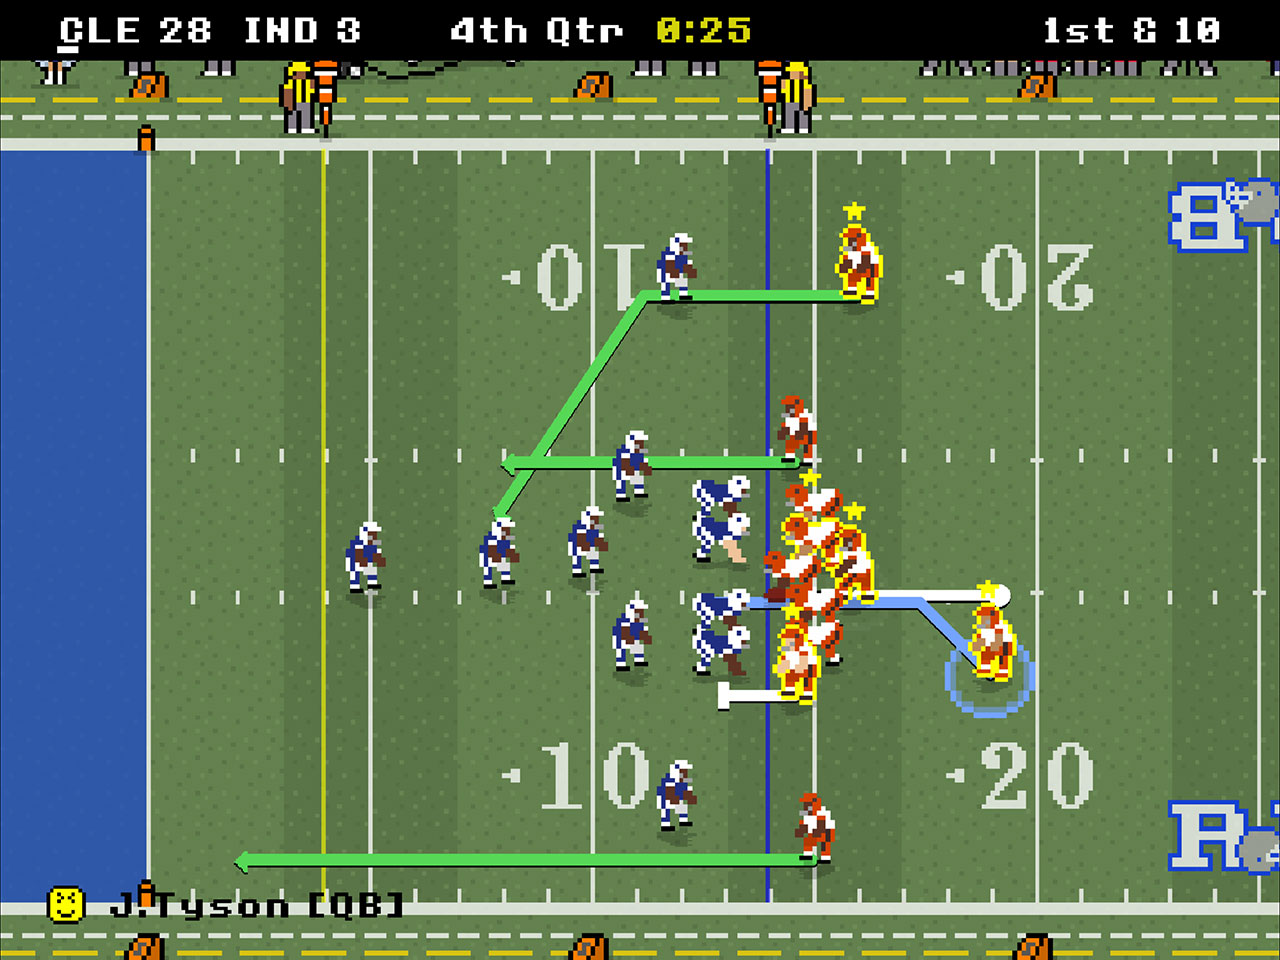 Taking Cleveland All the Way in Retro Bowl